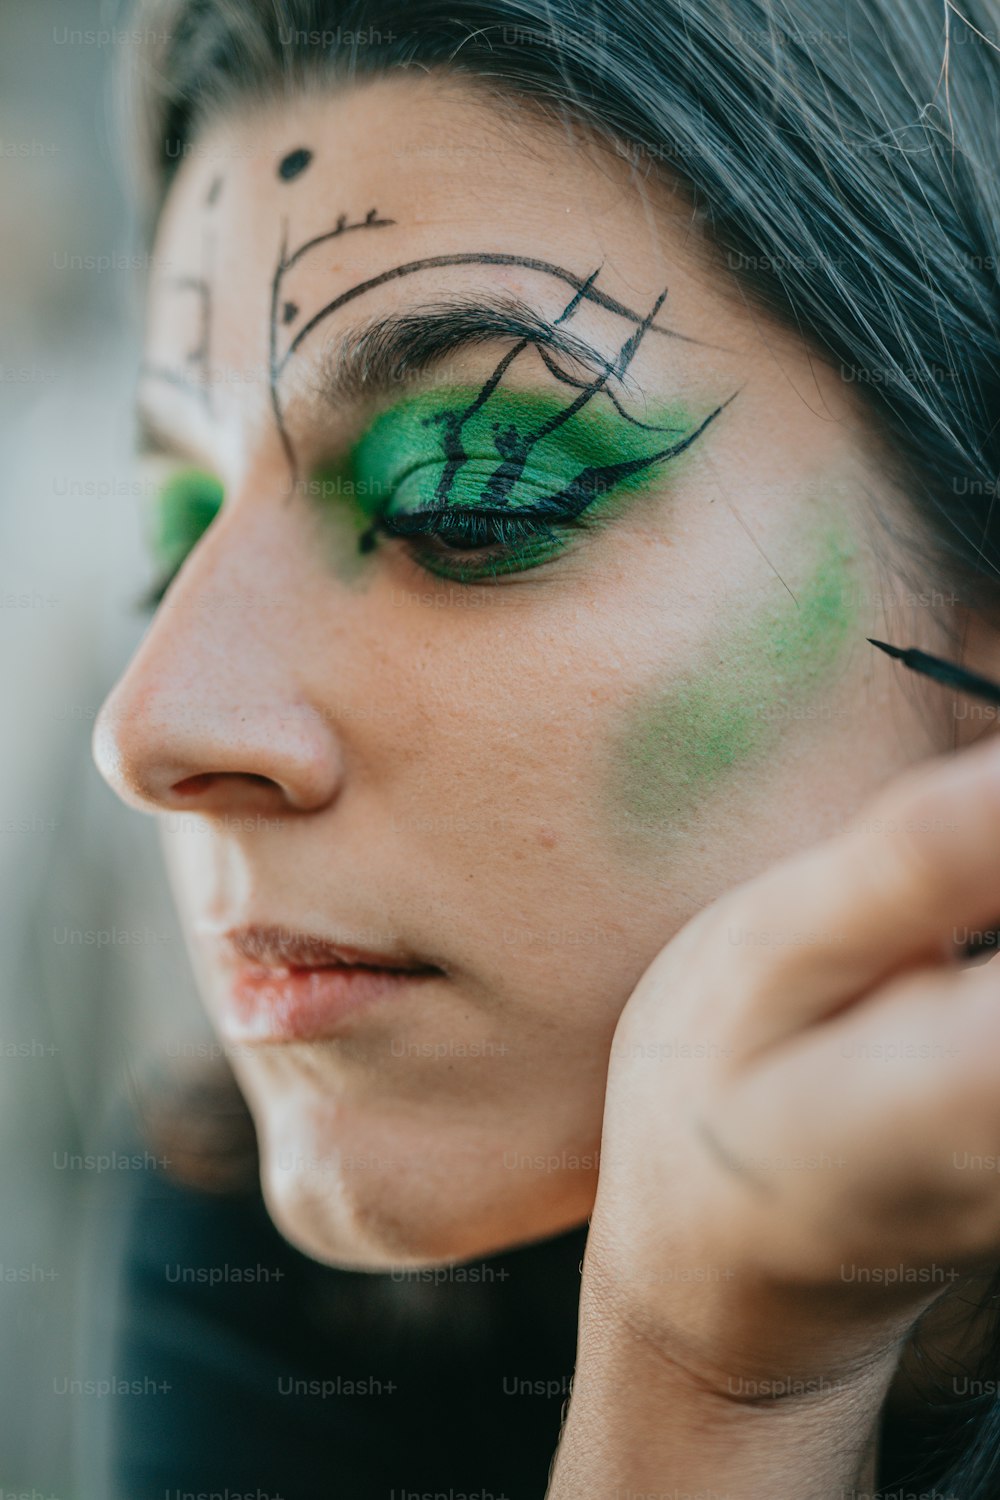 a woman with green eye makeup holding a cell phone